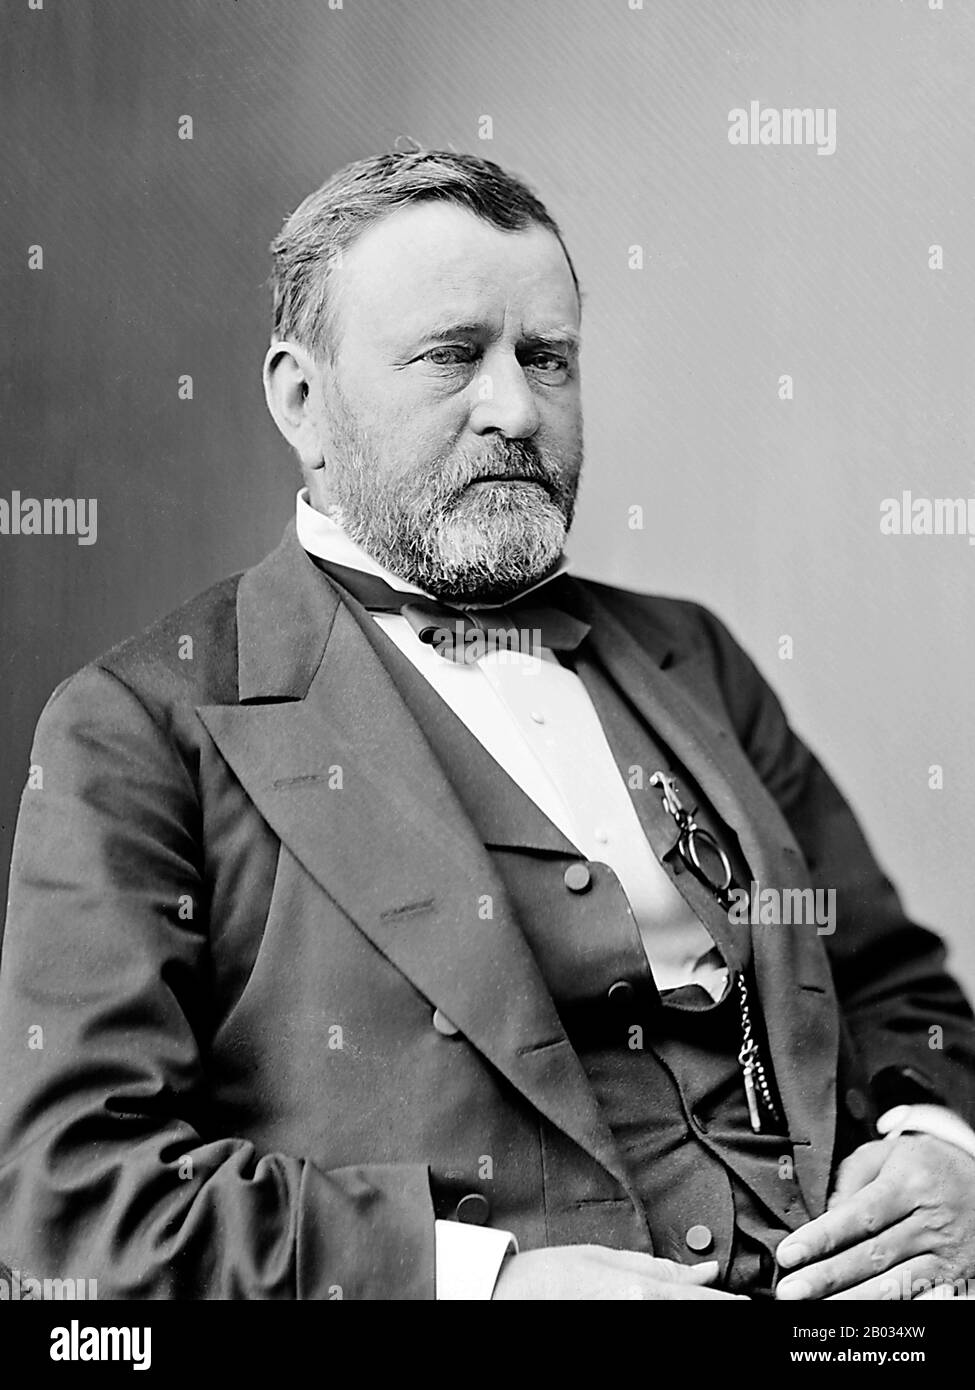 Ulysses S. Grant (born Hiram Ulysses Grant; April 27, 1822 – July 23, 1885) was the 18th President of the United States (1869–77). As Commanding General of the United States Army (1864–69), Grant worked closely with President Abraham Lincoln to lead the Union Army to victory over the Confederacy in the American Civil War.  He implemented Congressional Reconstruction, often at odds with Lincoln's successor, Andrew Johnson. Twice elected president, Grant led the Republicans in their effort to remove the vestiges of Confederate nationalism and slavery, protect African-American citizenship, and su Stock Photo